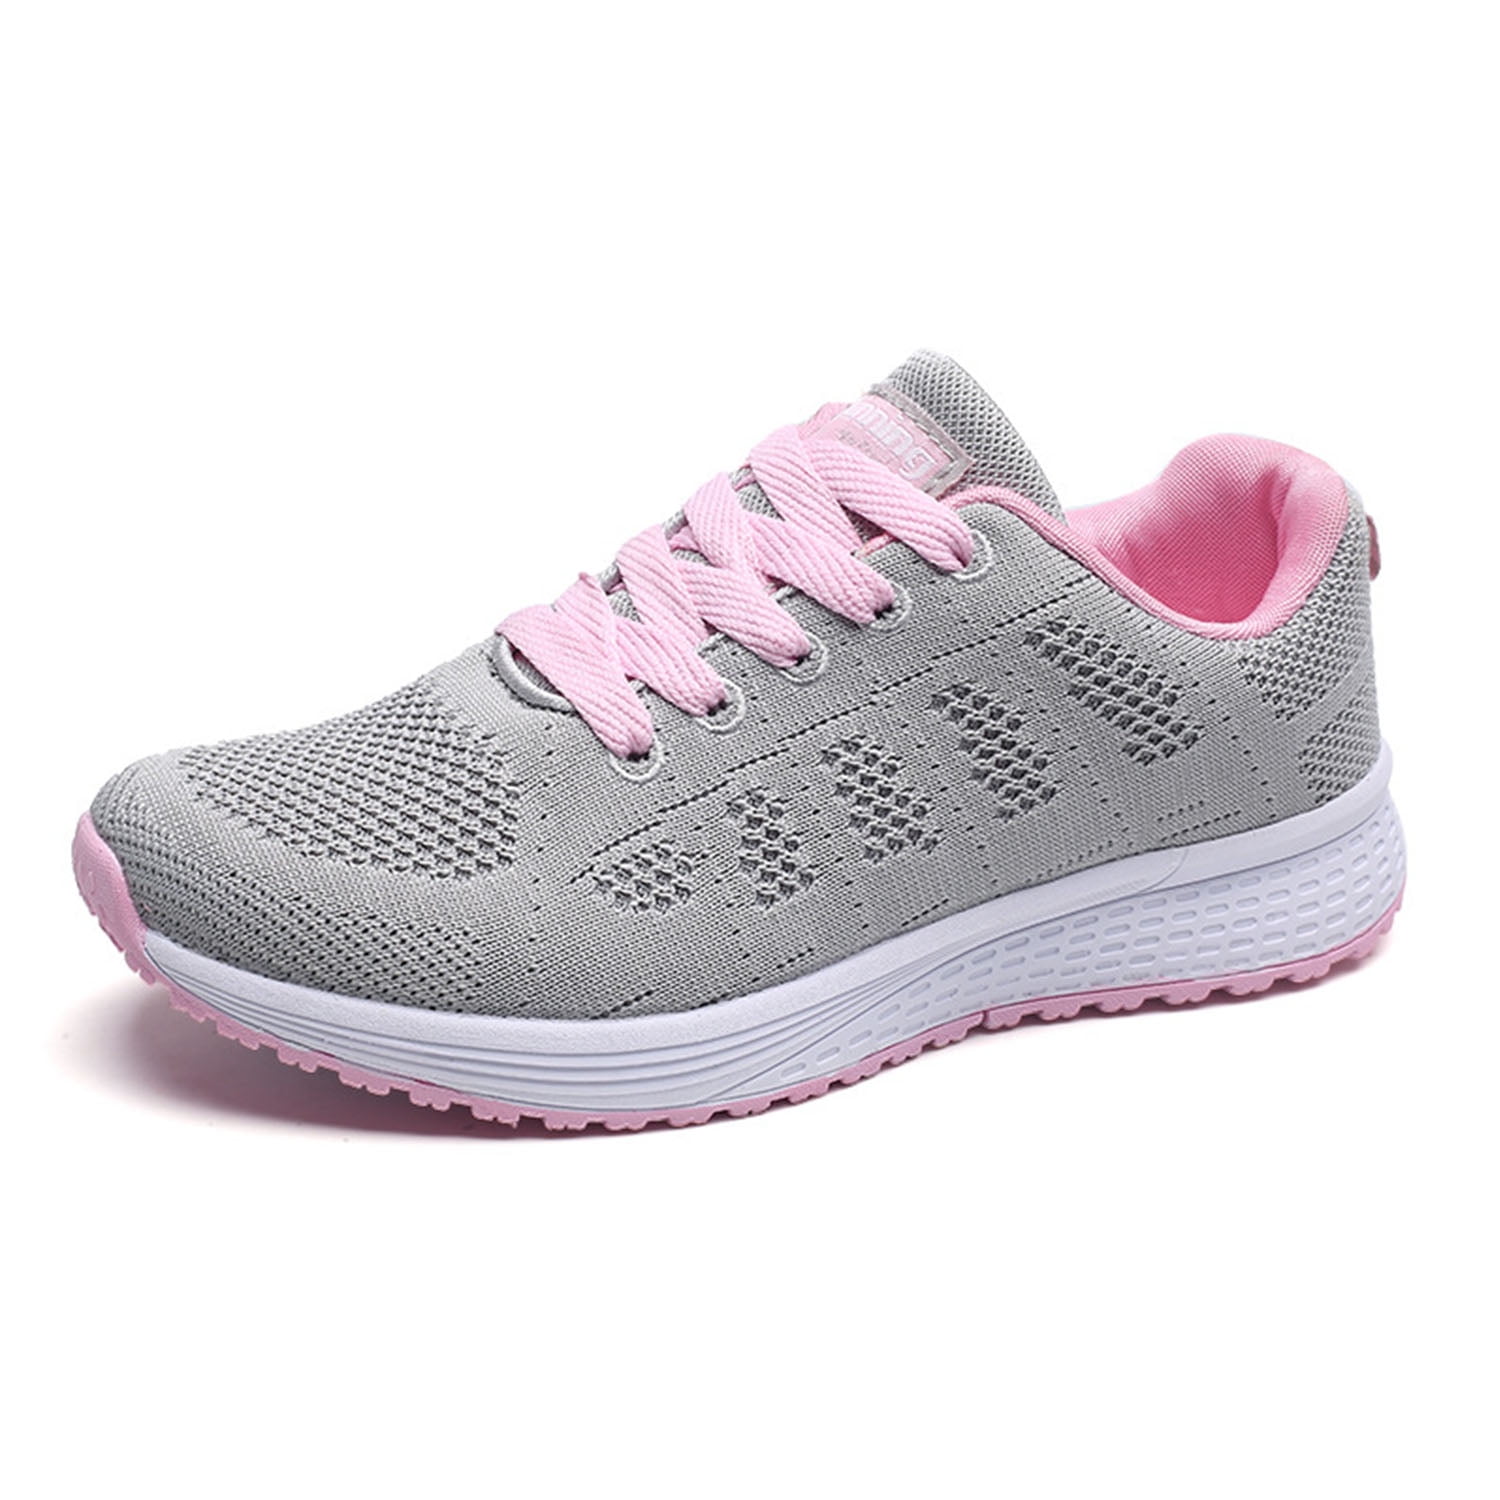 WONESION Womens Walking Shoes Mesh Athletic Running Sneakers Grey Size ...